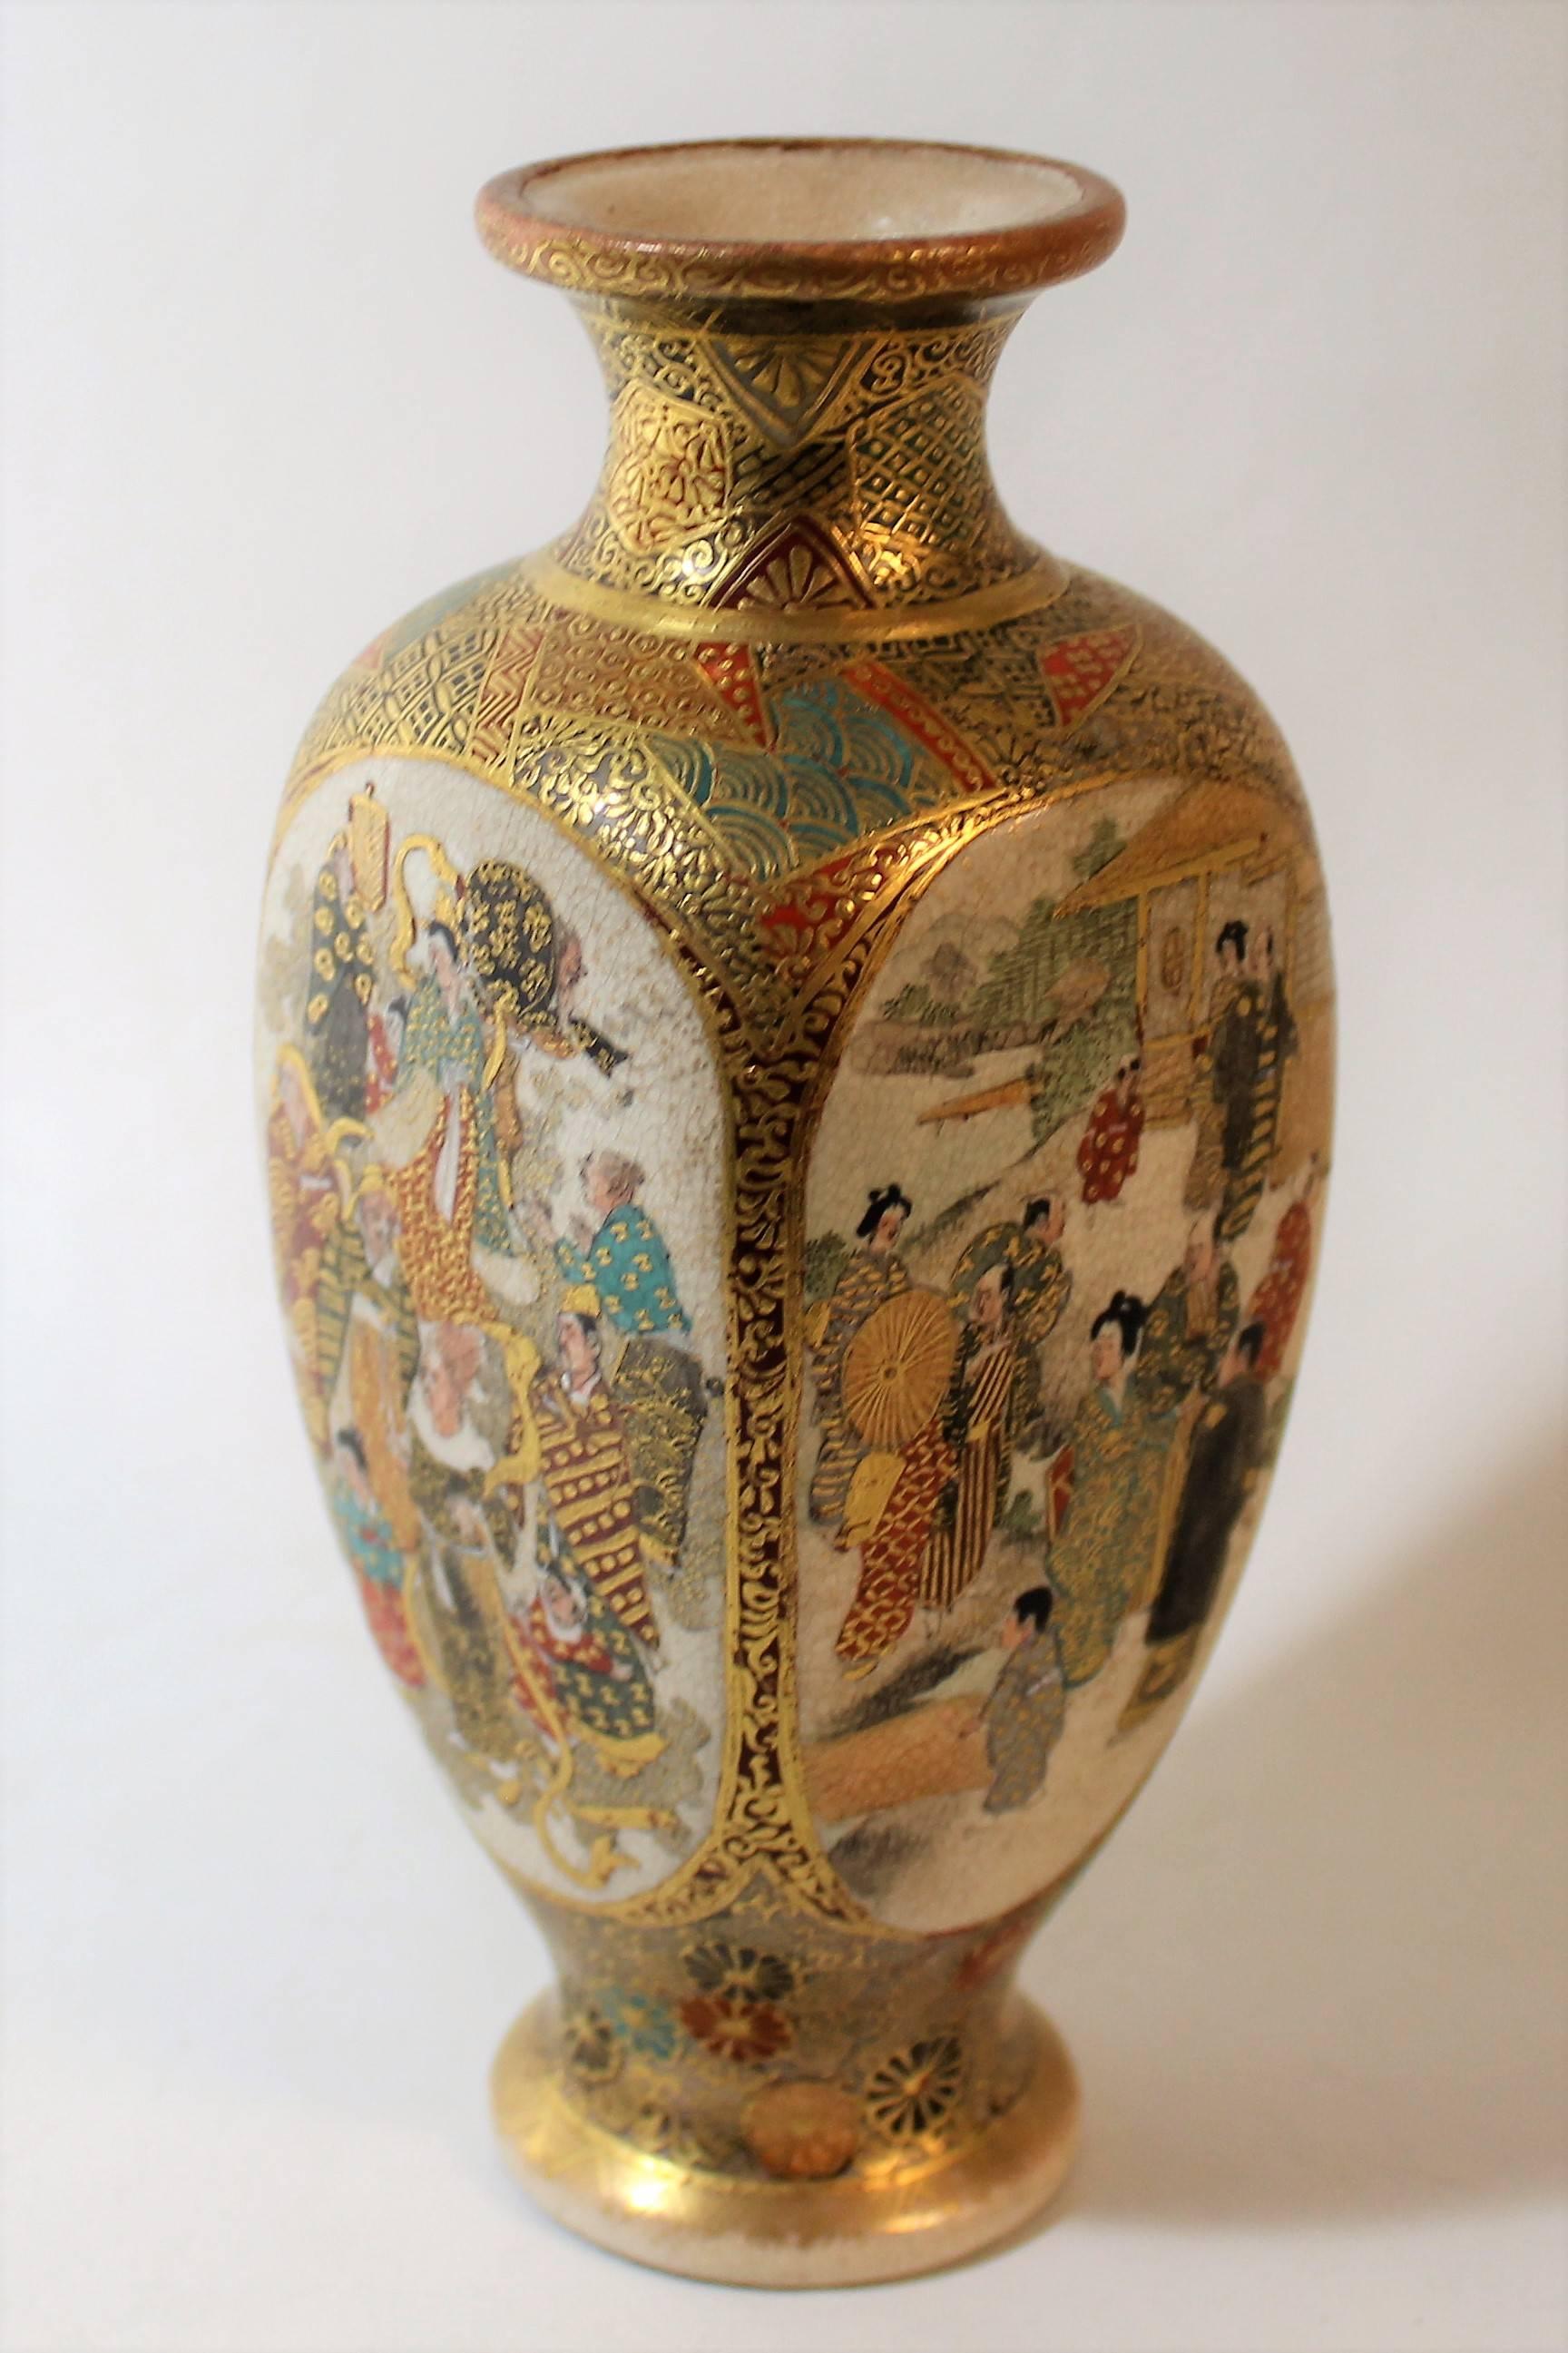 Japanese Satsuma pottery vase dating to the late 19th century. The vase is made in four sided form and heavily accented with gilt throughout. Each side of the vase is hand-painted with figural scenes in various activities.